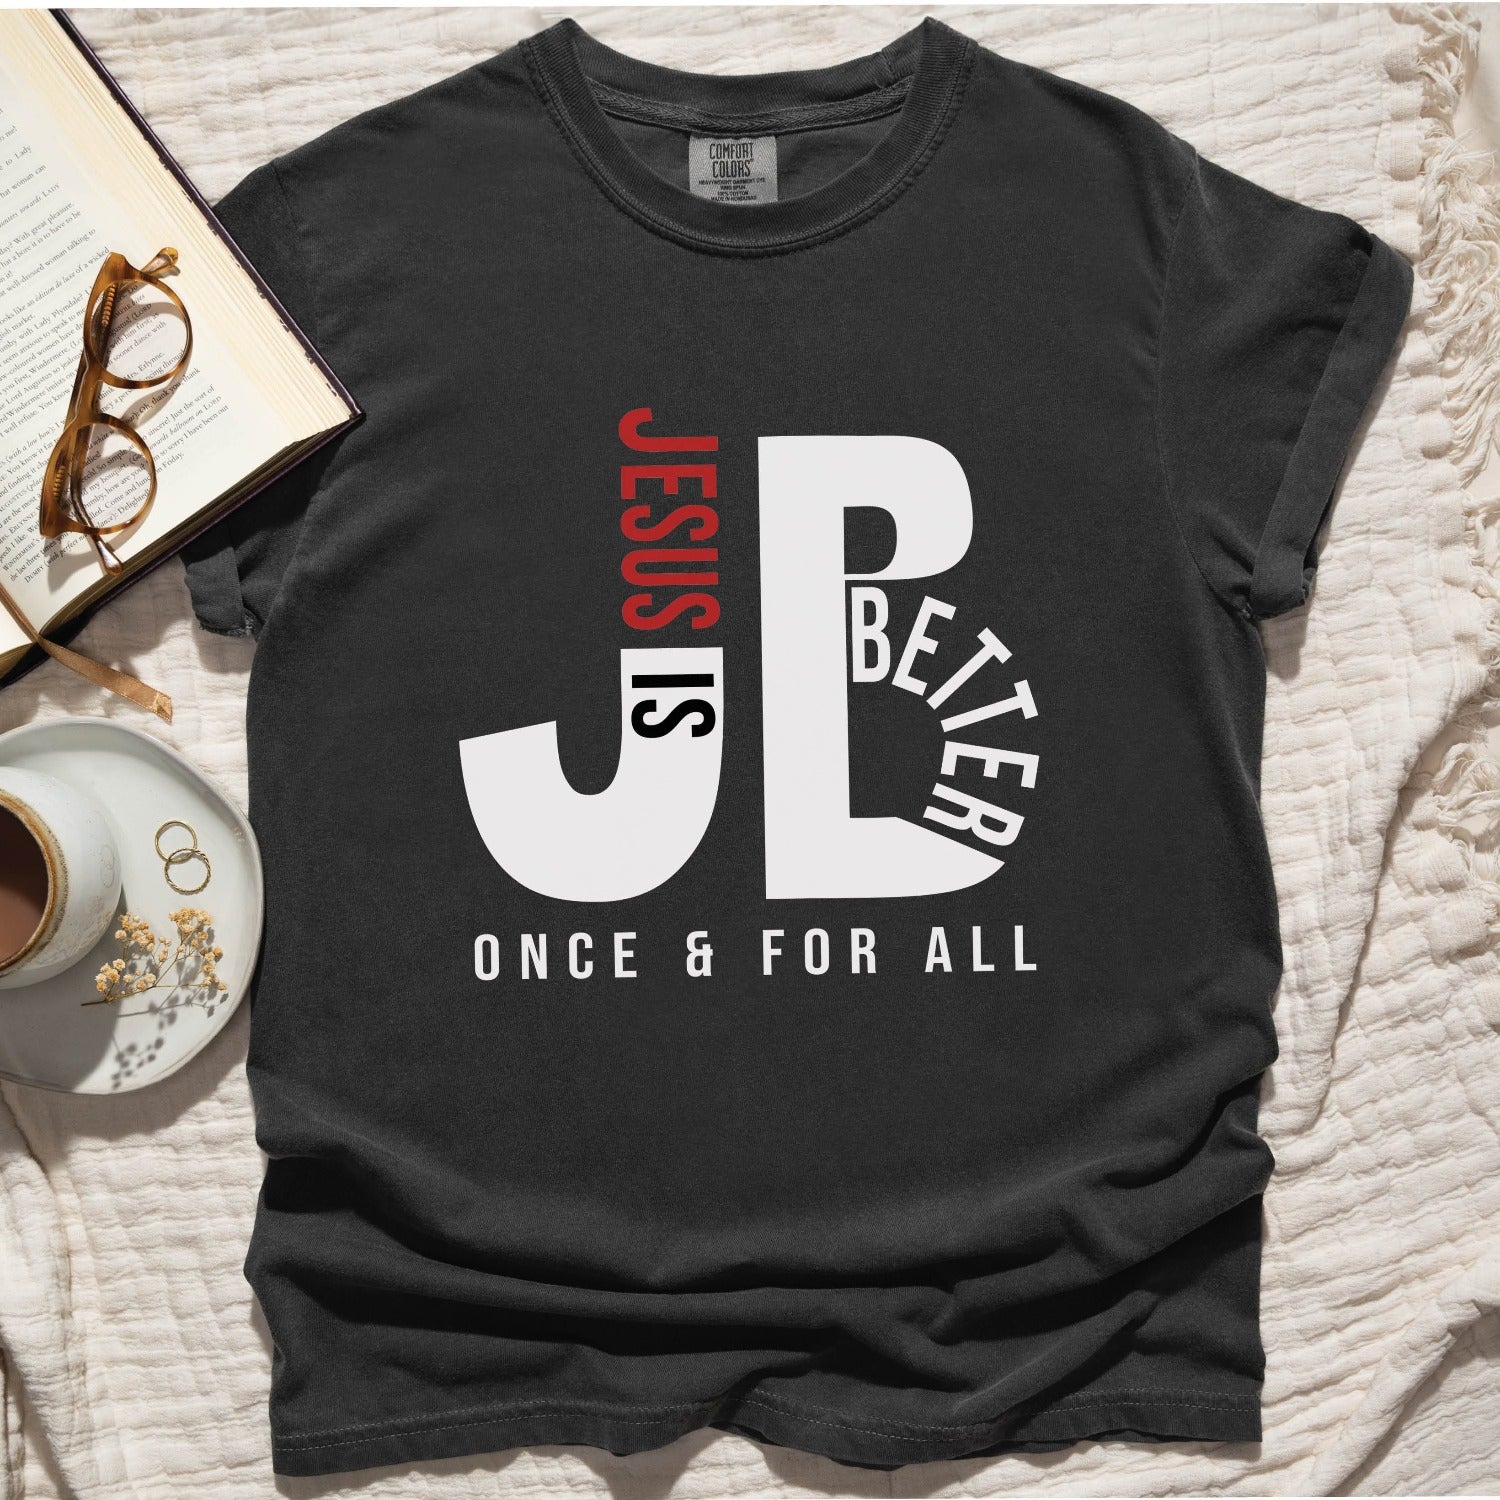 "JB" typography "Jesus is Better Once and For All" design in white and red, Christian, based on the bible book of Hebrews, printed on a Pepper dark gray color Unisex Comfort Colors C1717 t-shirt, with Jesus in red letters, created for faith-based women and men